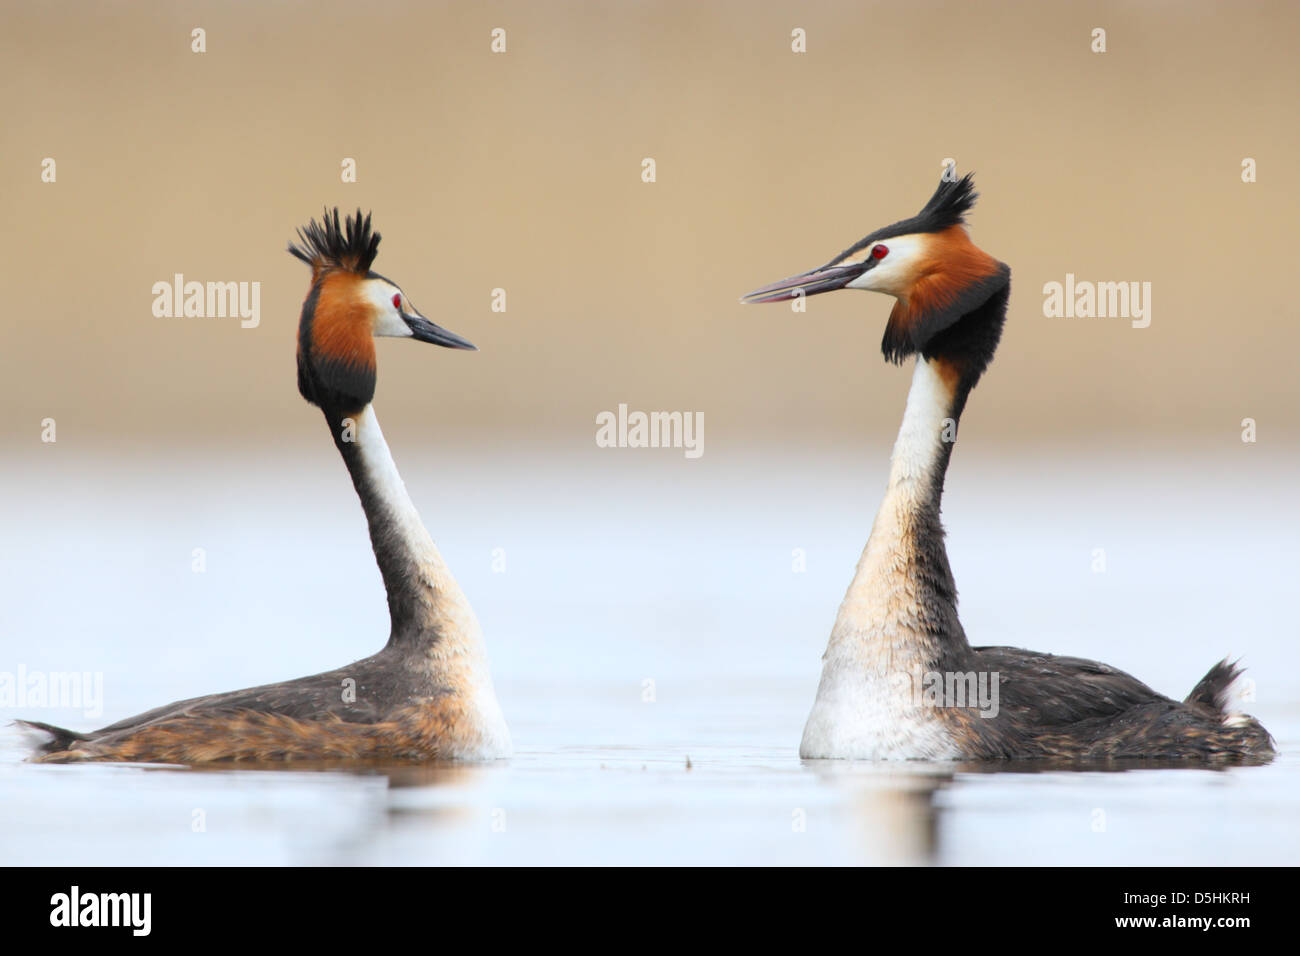 Great Crested Grebes (Podiceps cristatus) in courtship display, shaking heads. Europe Stock Photo